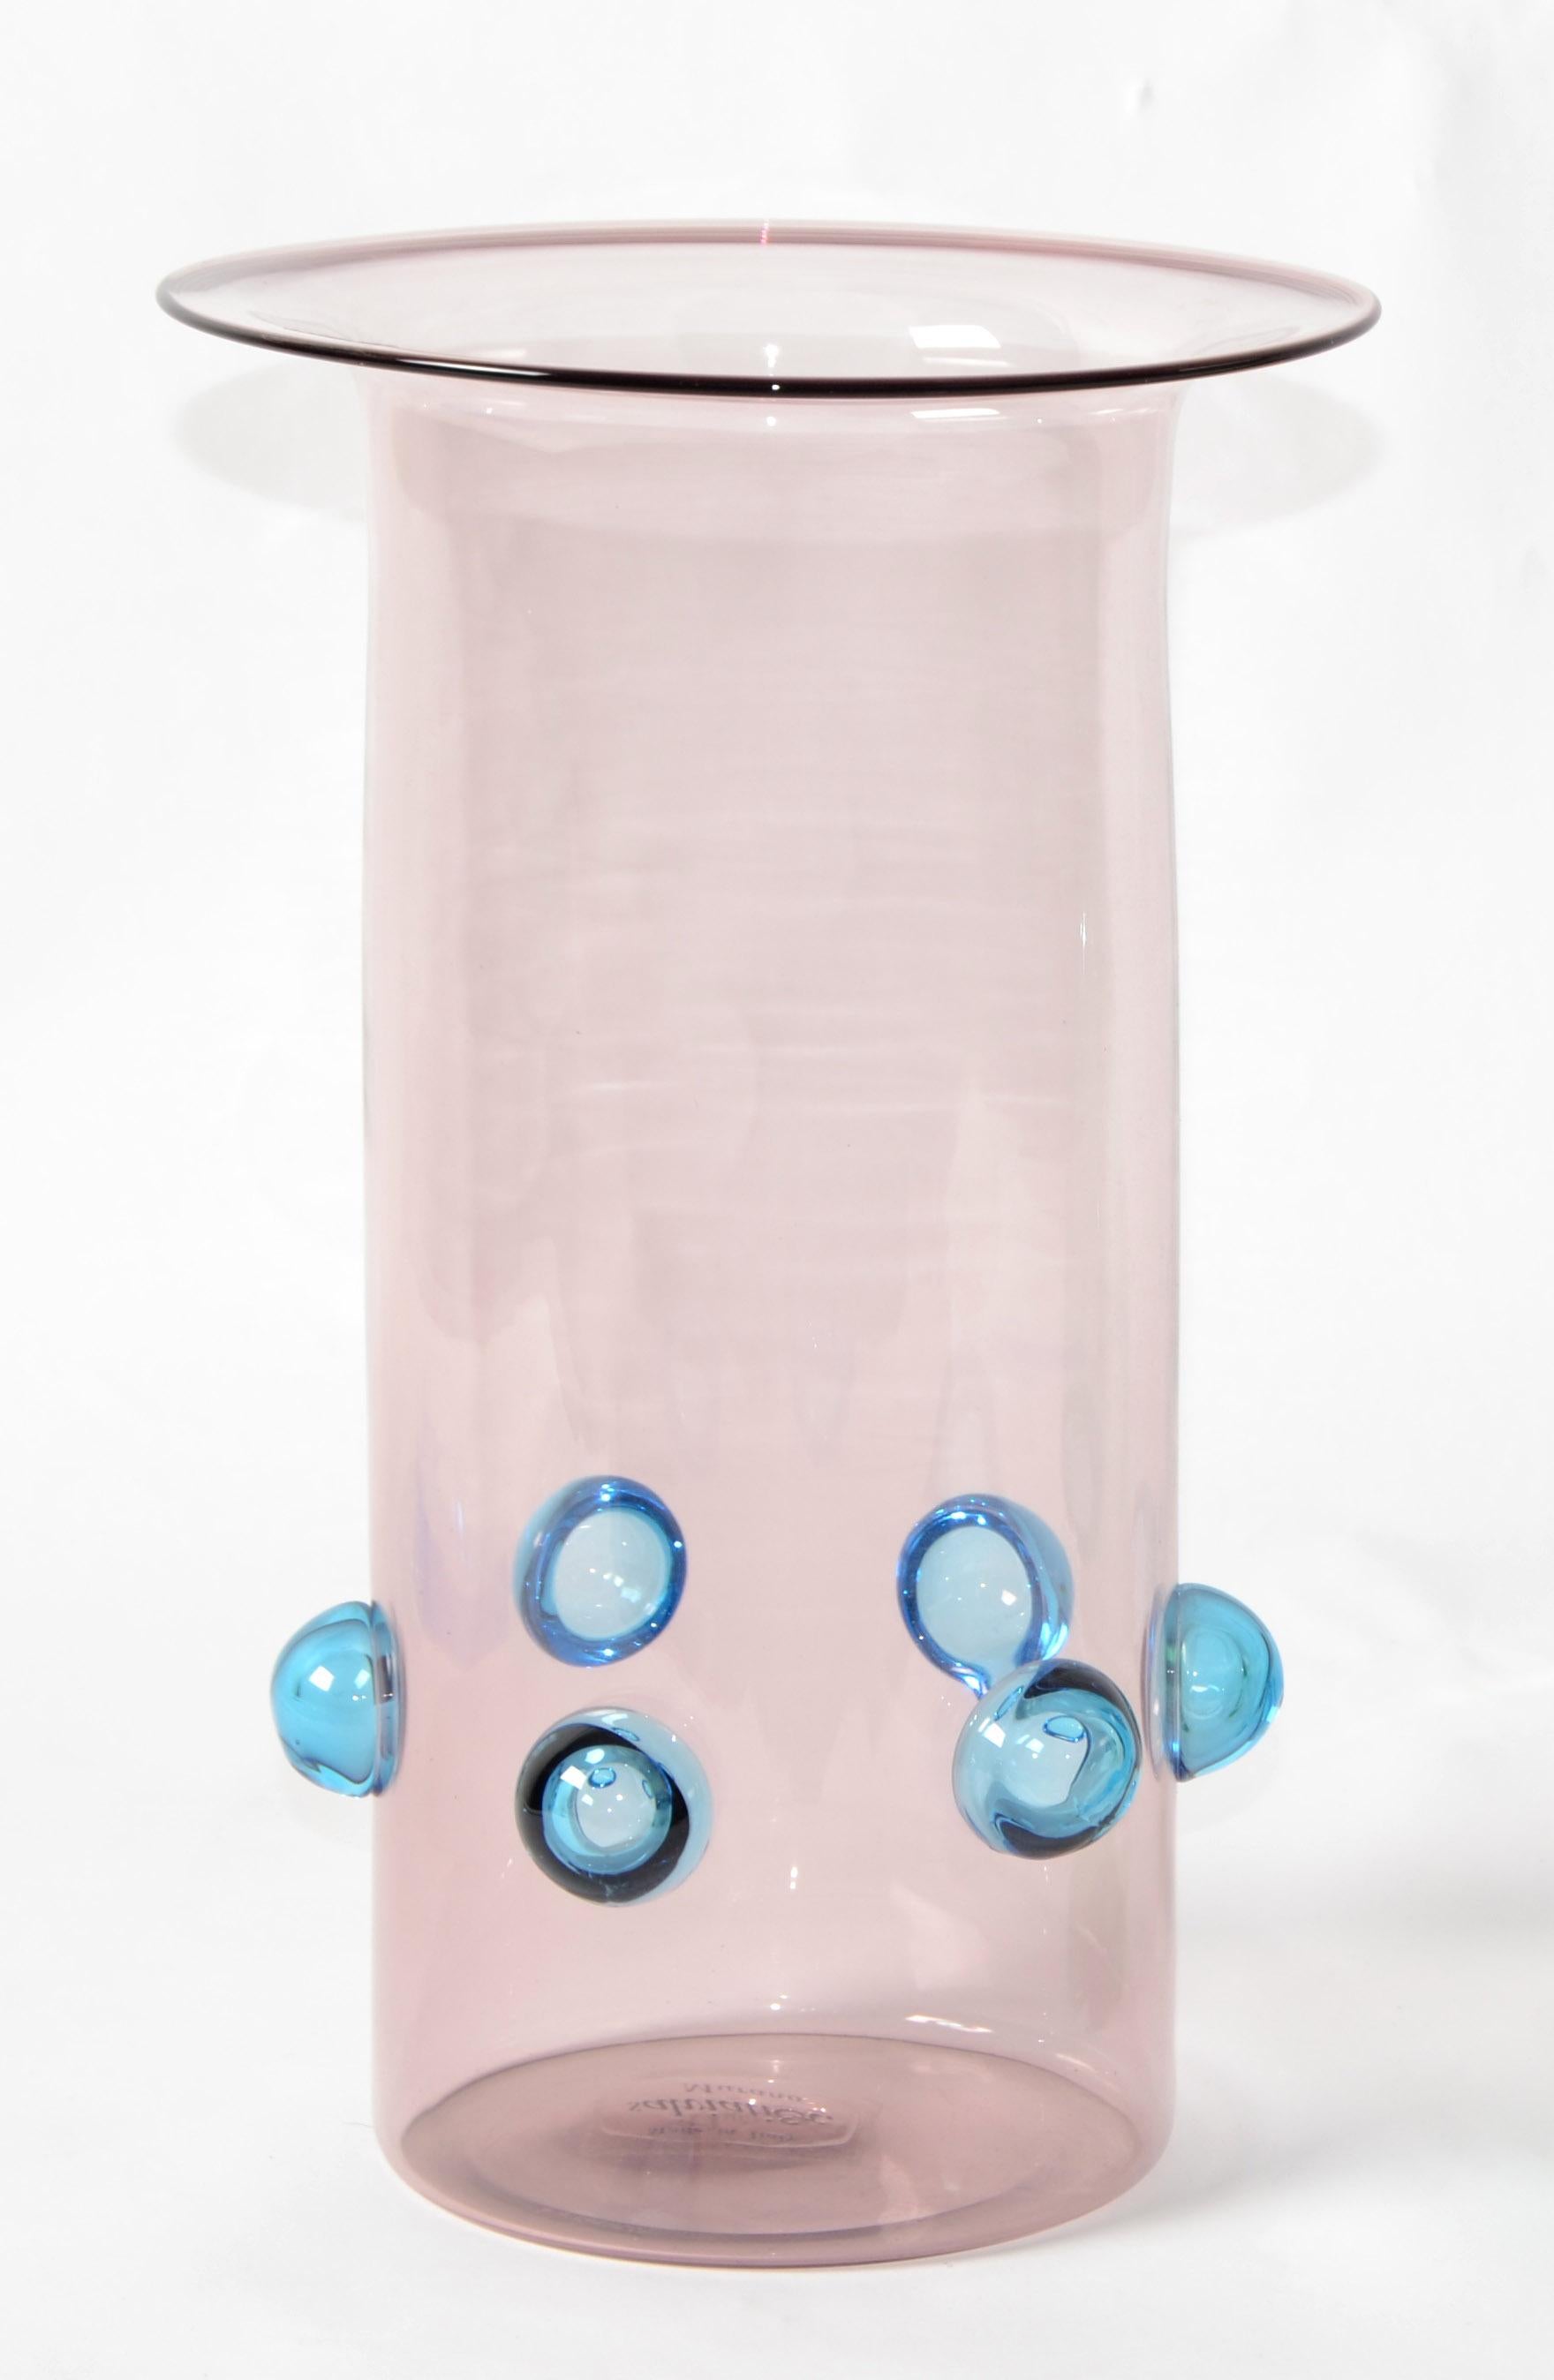 One of a kind Luciano Gaspari blown Art Glass cylinder shaped vase in light pink with a circle of blue bubbles around, made for Salviati Murano, Venice.
Italian Mid-Century Modern highly skilled artisan glass craftsmanship all hand-blown or